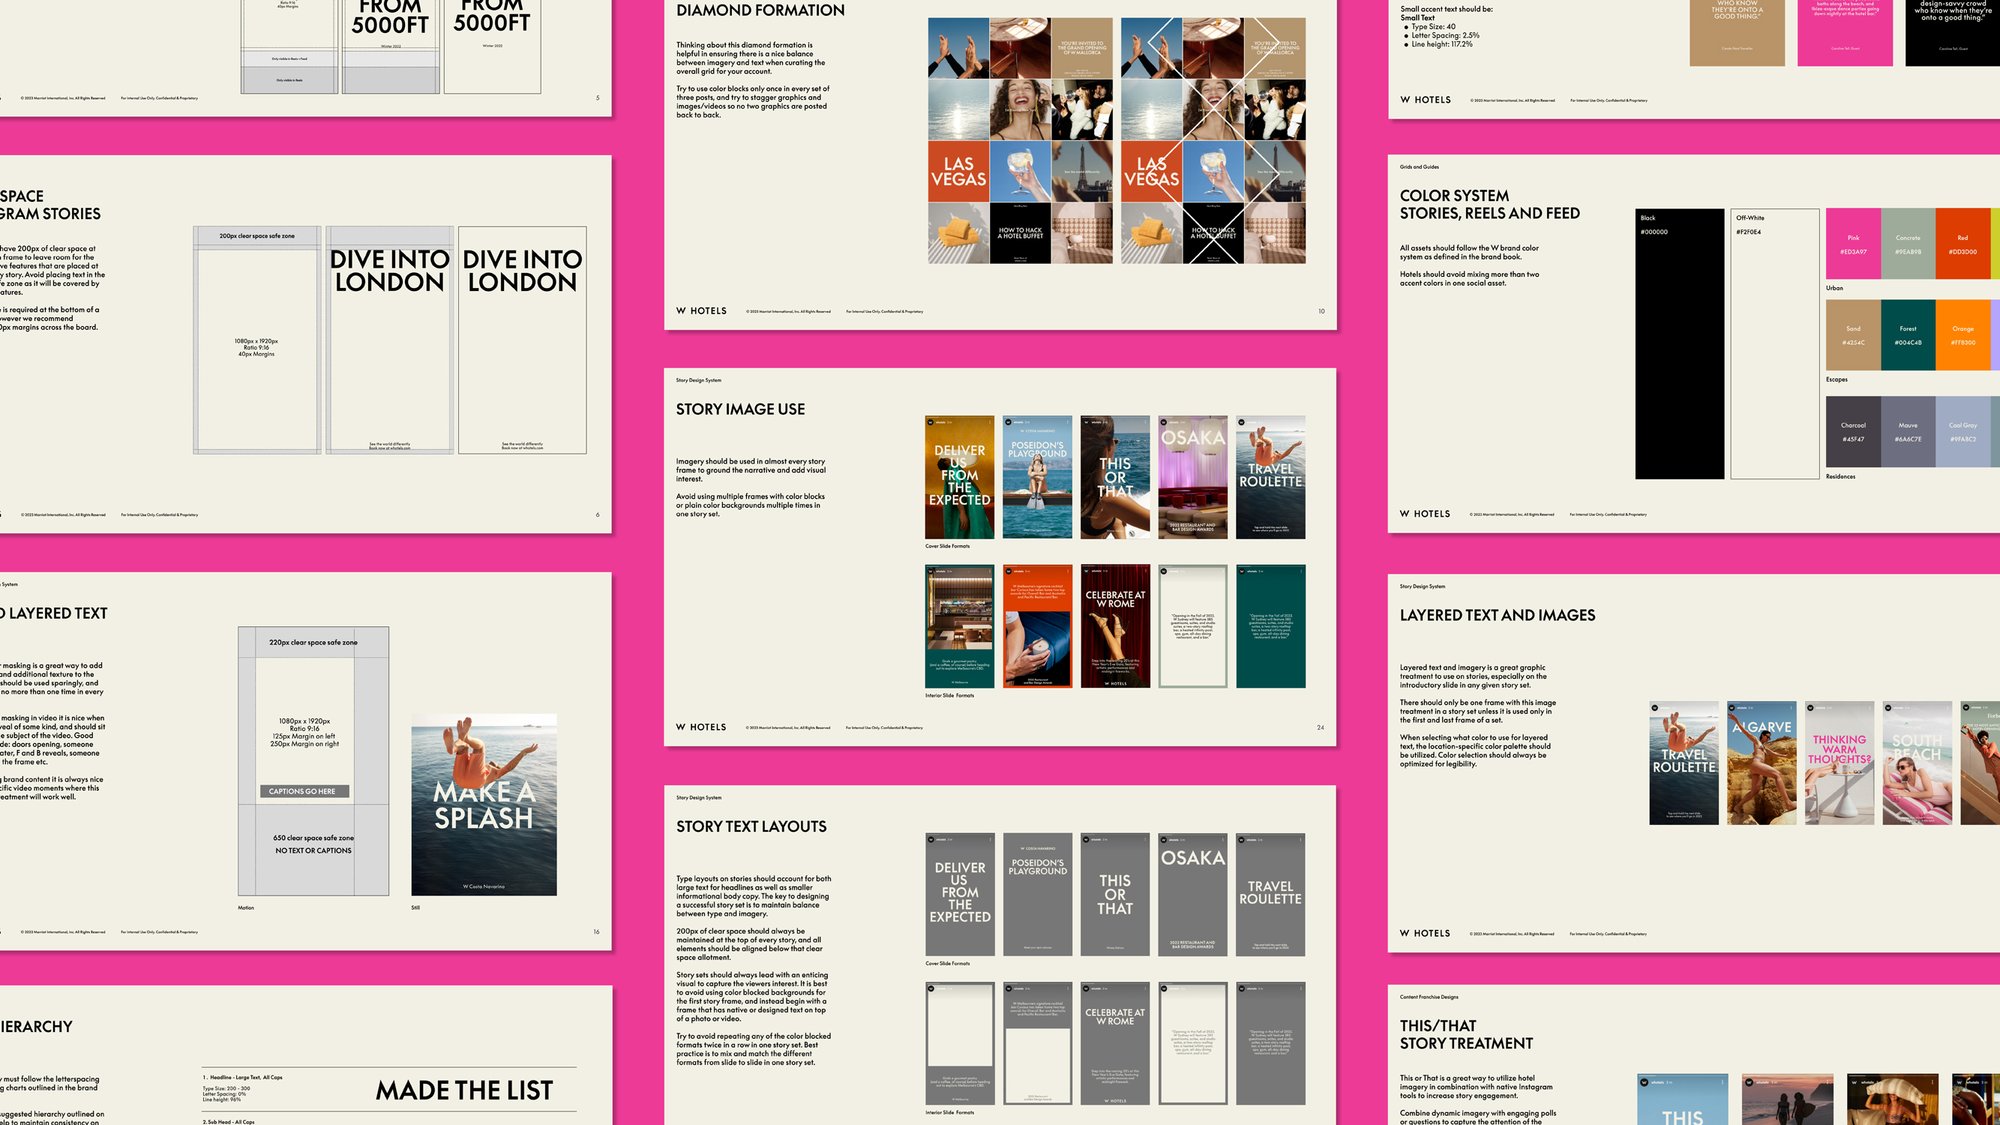 W Hotels social Media strategy, graphic design frameworks, brand text requirements, and content management plans in a slide deck format from us, their marketing and social agency